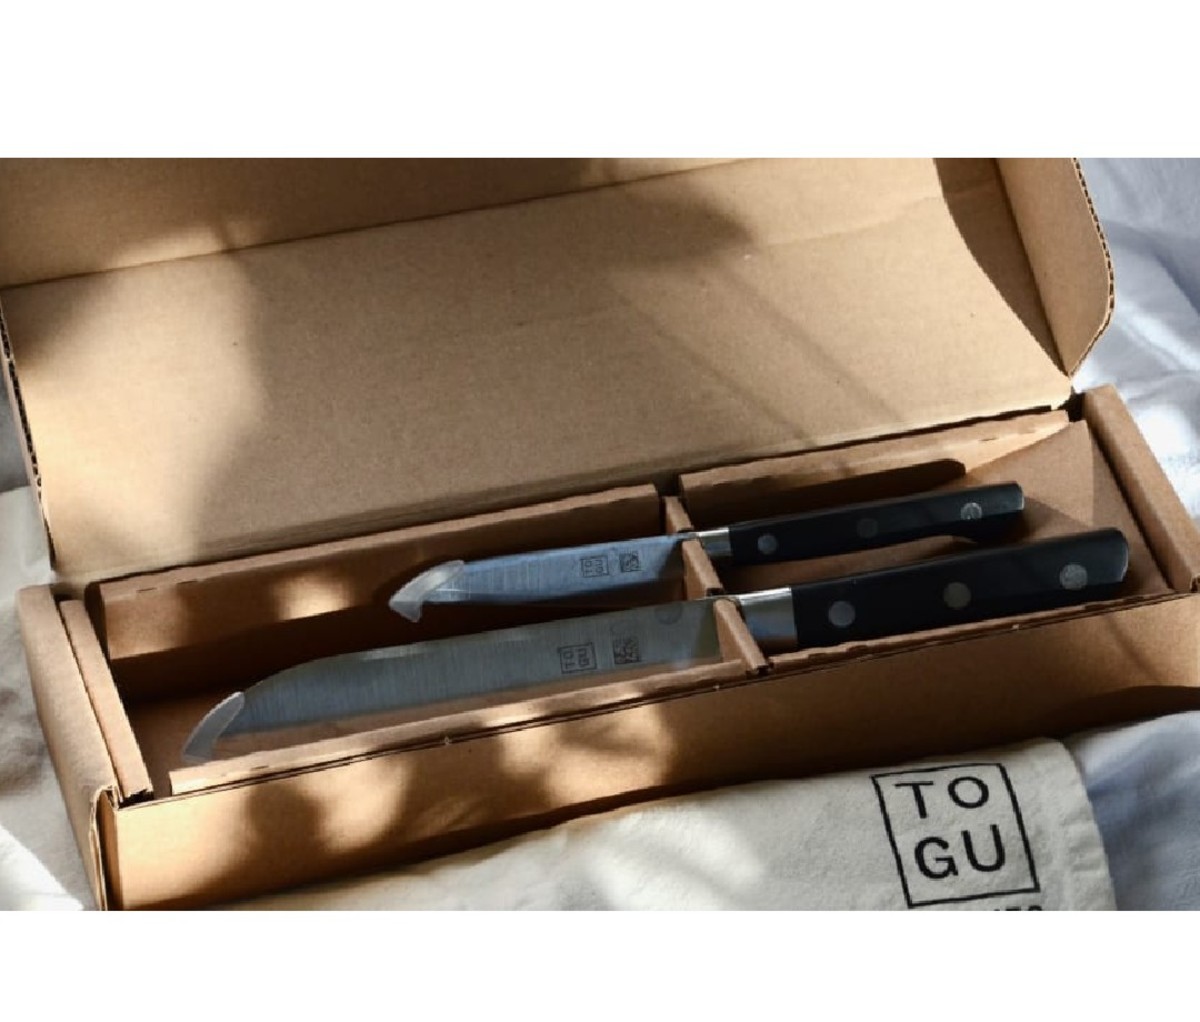 Open brown shipping box containing two Togu knives